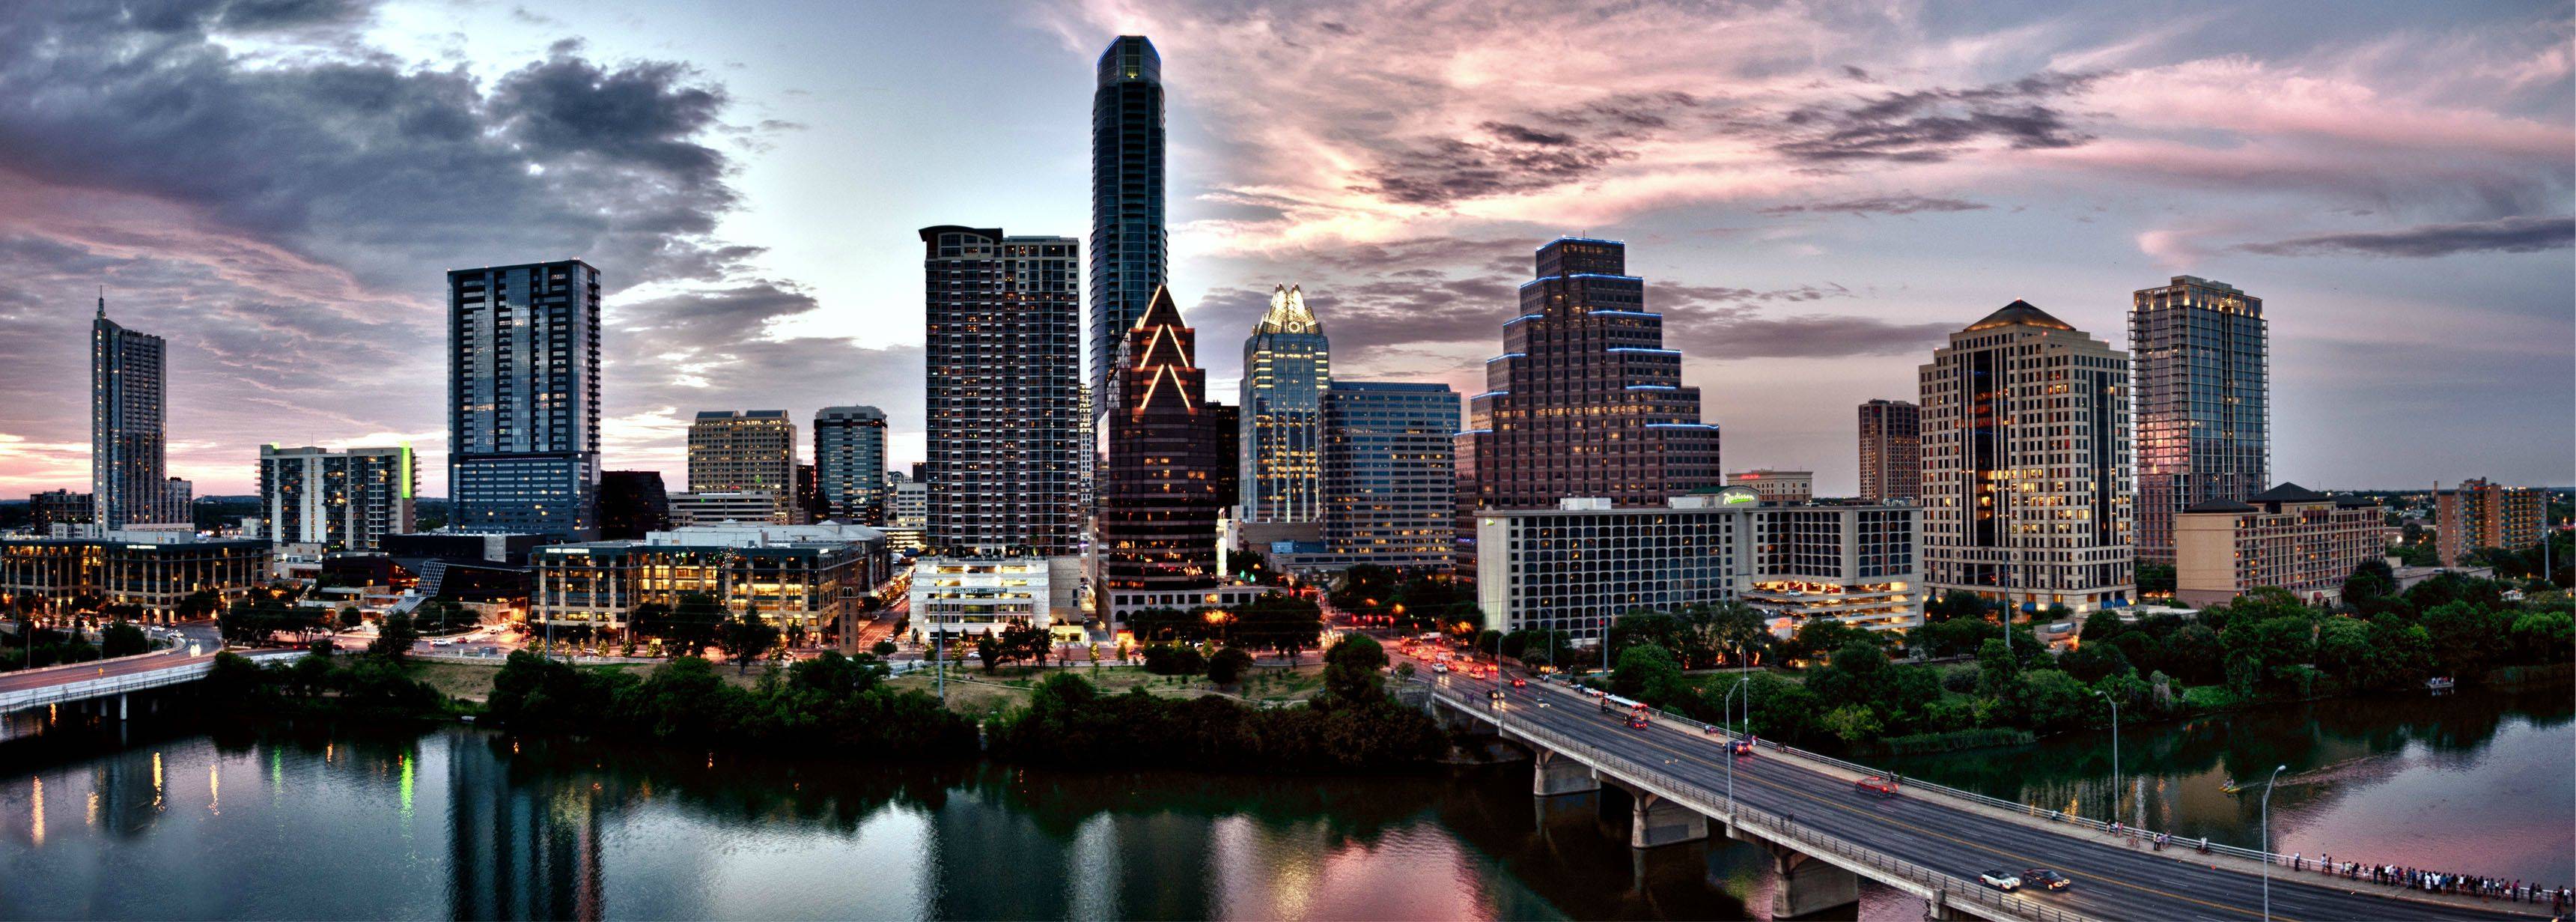 Austin Texas for Great Holiday Experience - Gets Ready